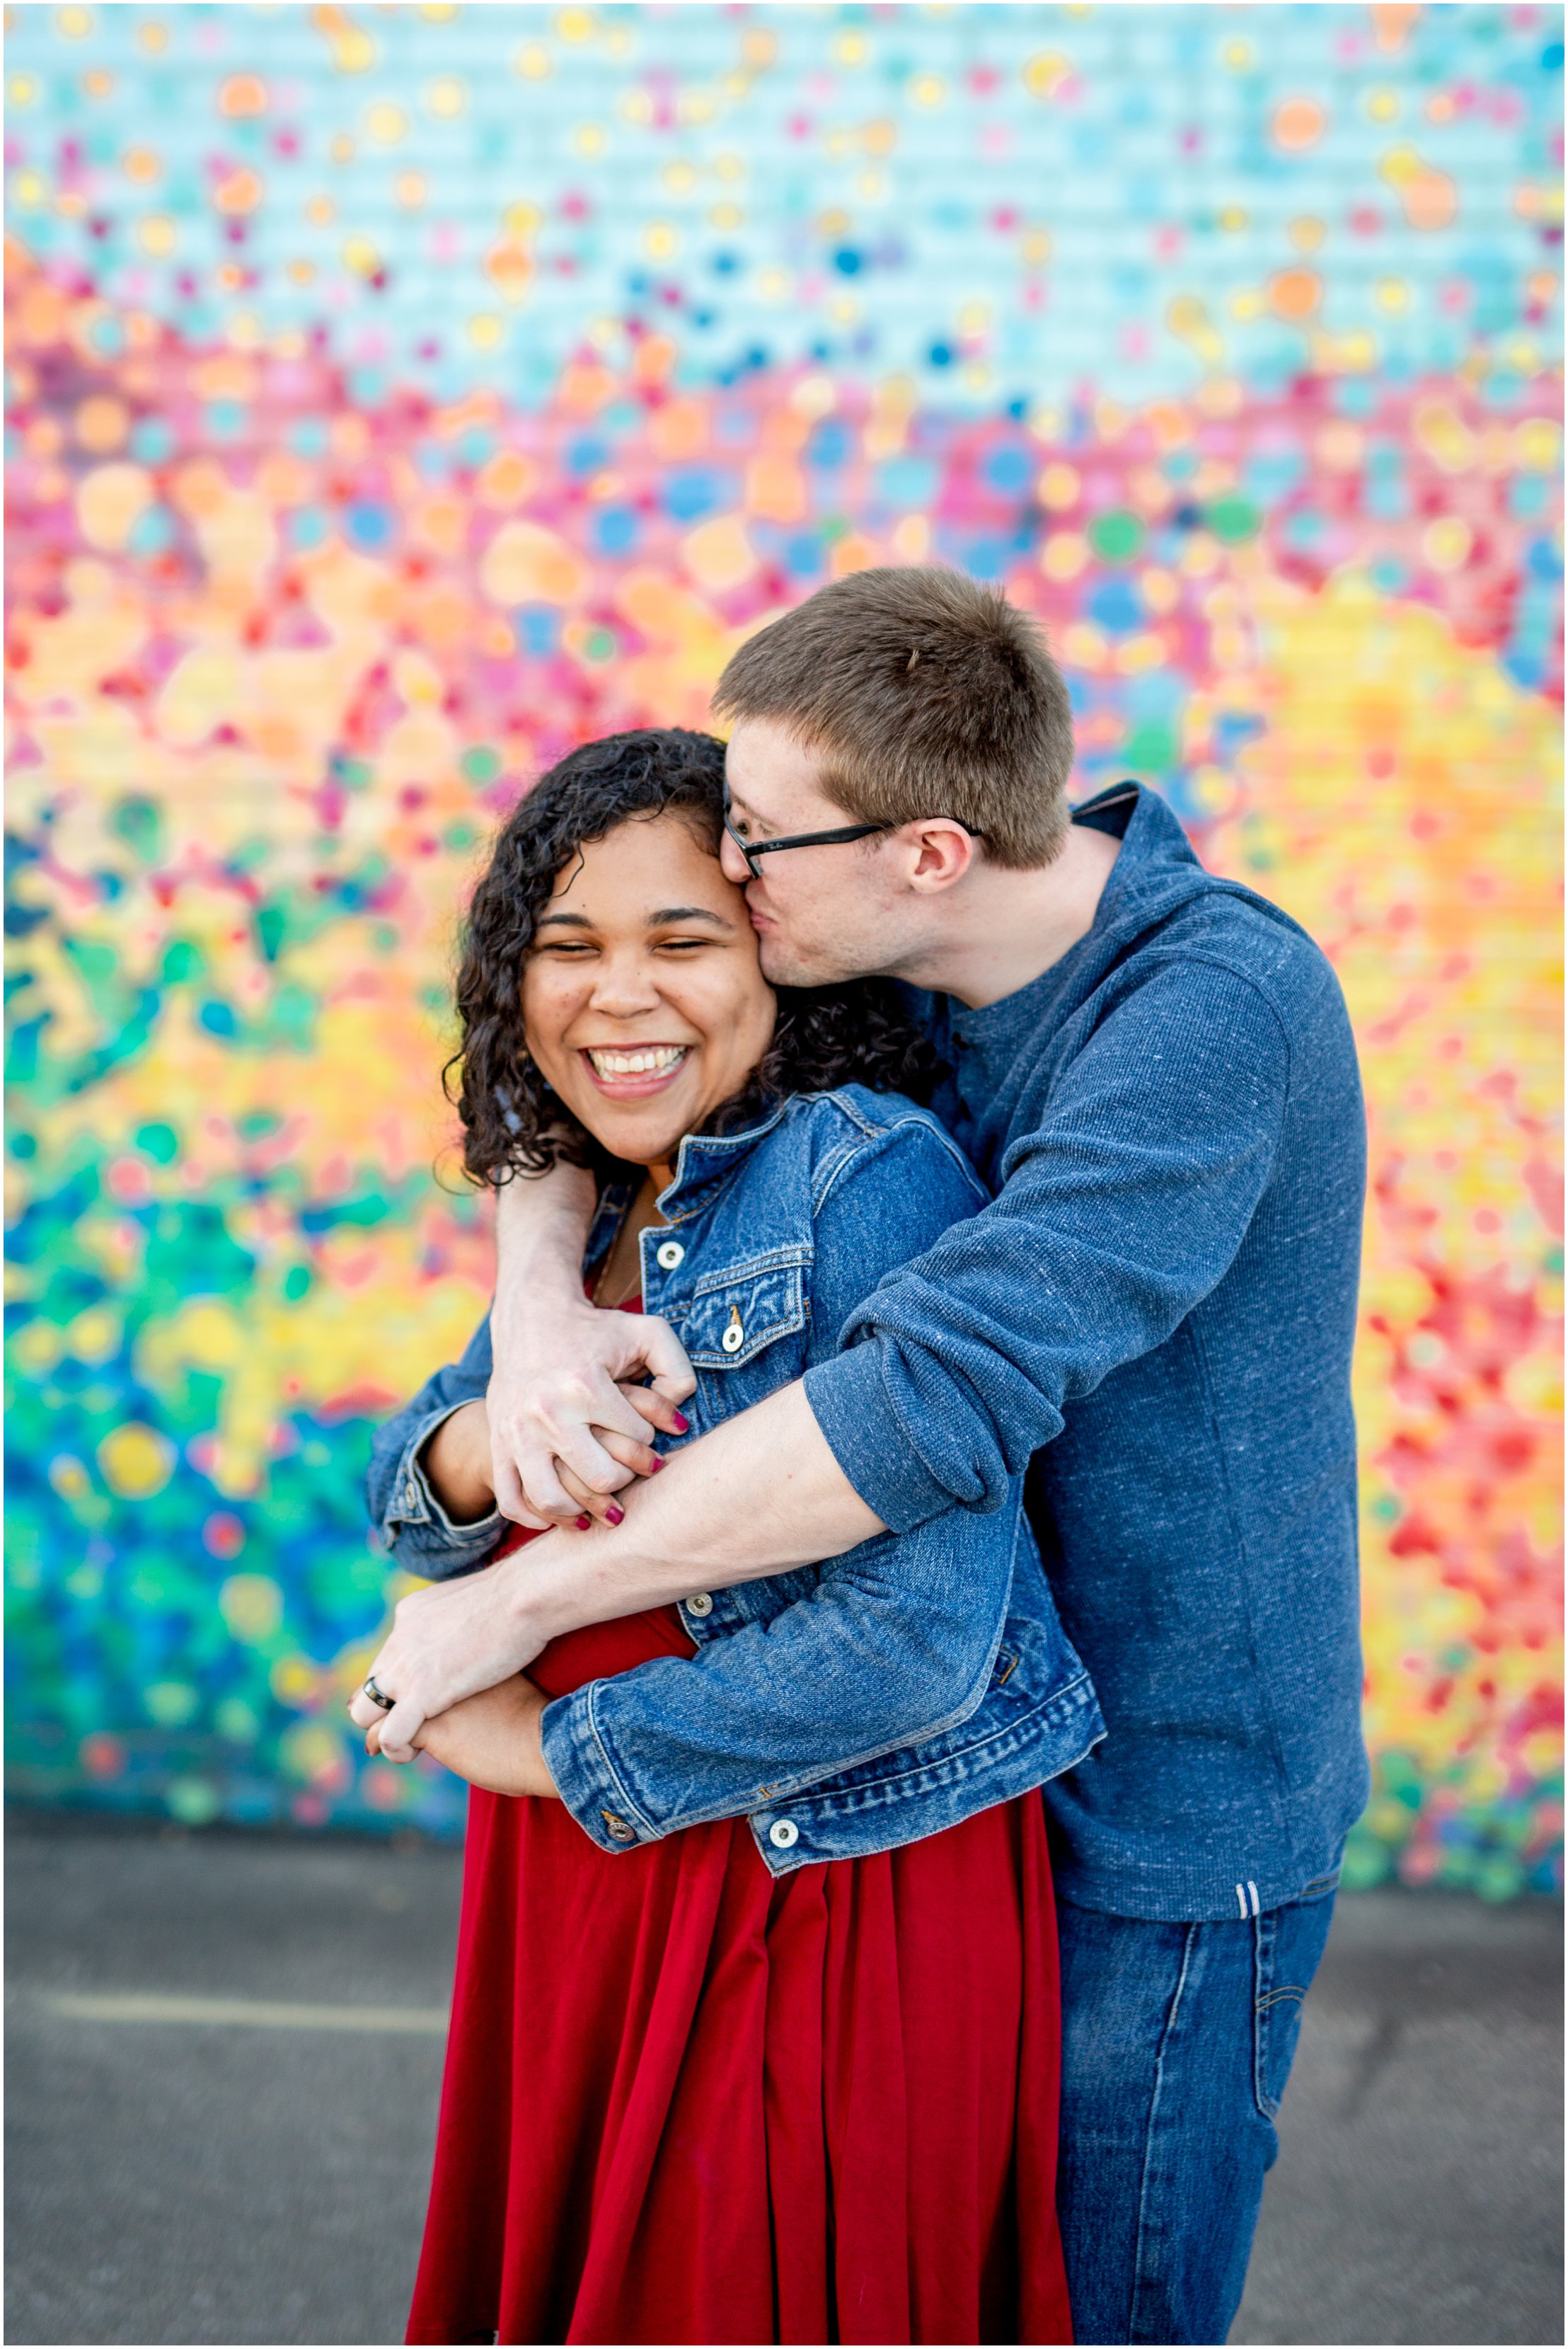 Greeley, Colorado Engagement Session by Iowa Wedding Photographer